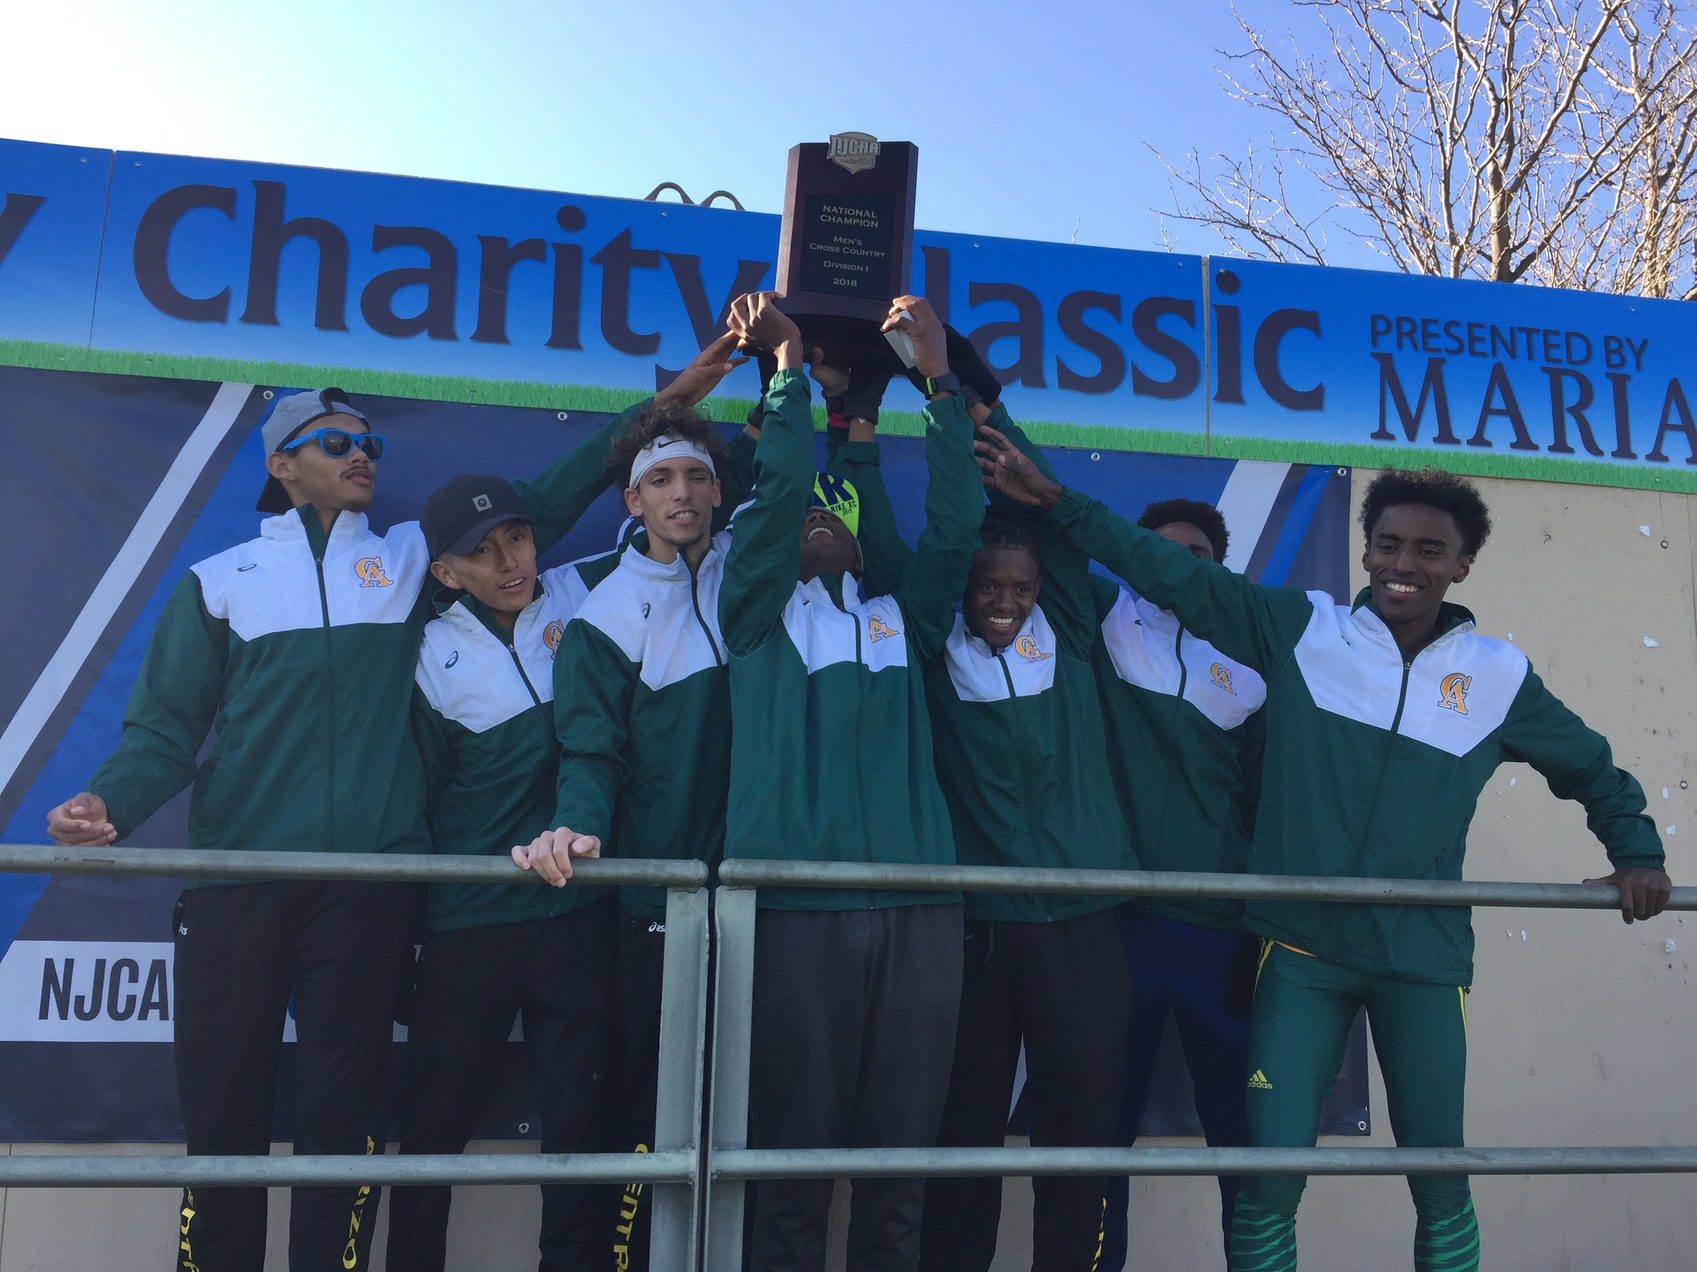 CAC Mens Cross Country 2018 NJCAA National Champions